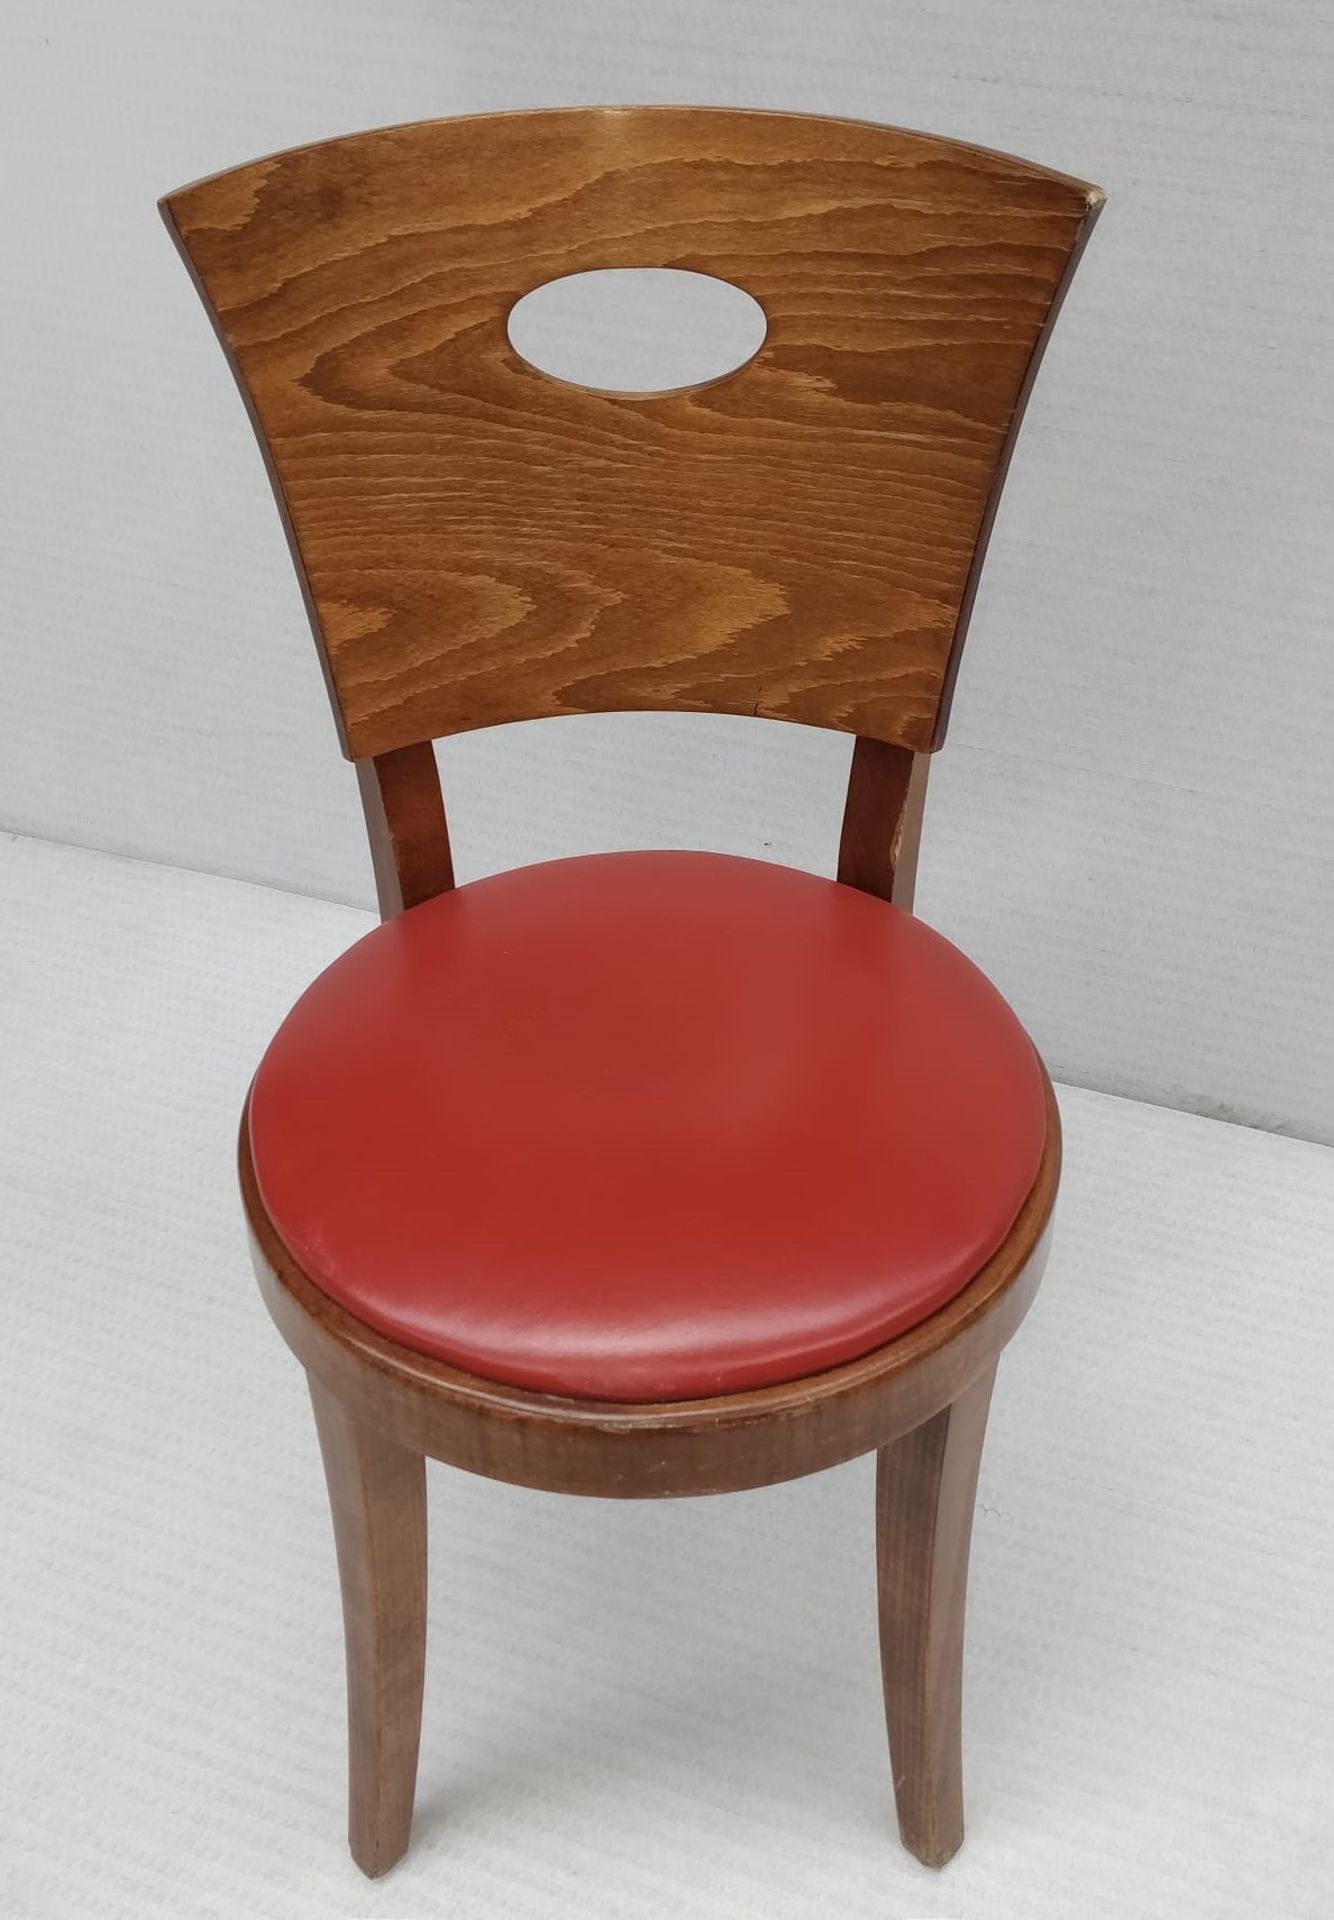 24 x Contemporary Restaurant Dining Chairs With Dark Wood Finish and Red Leather Seat Pads - - Image 3 of 6